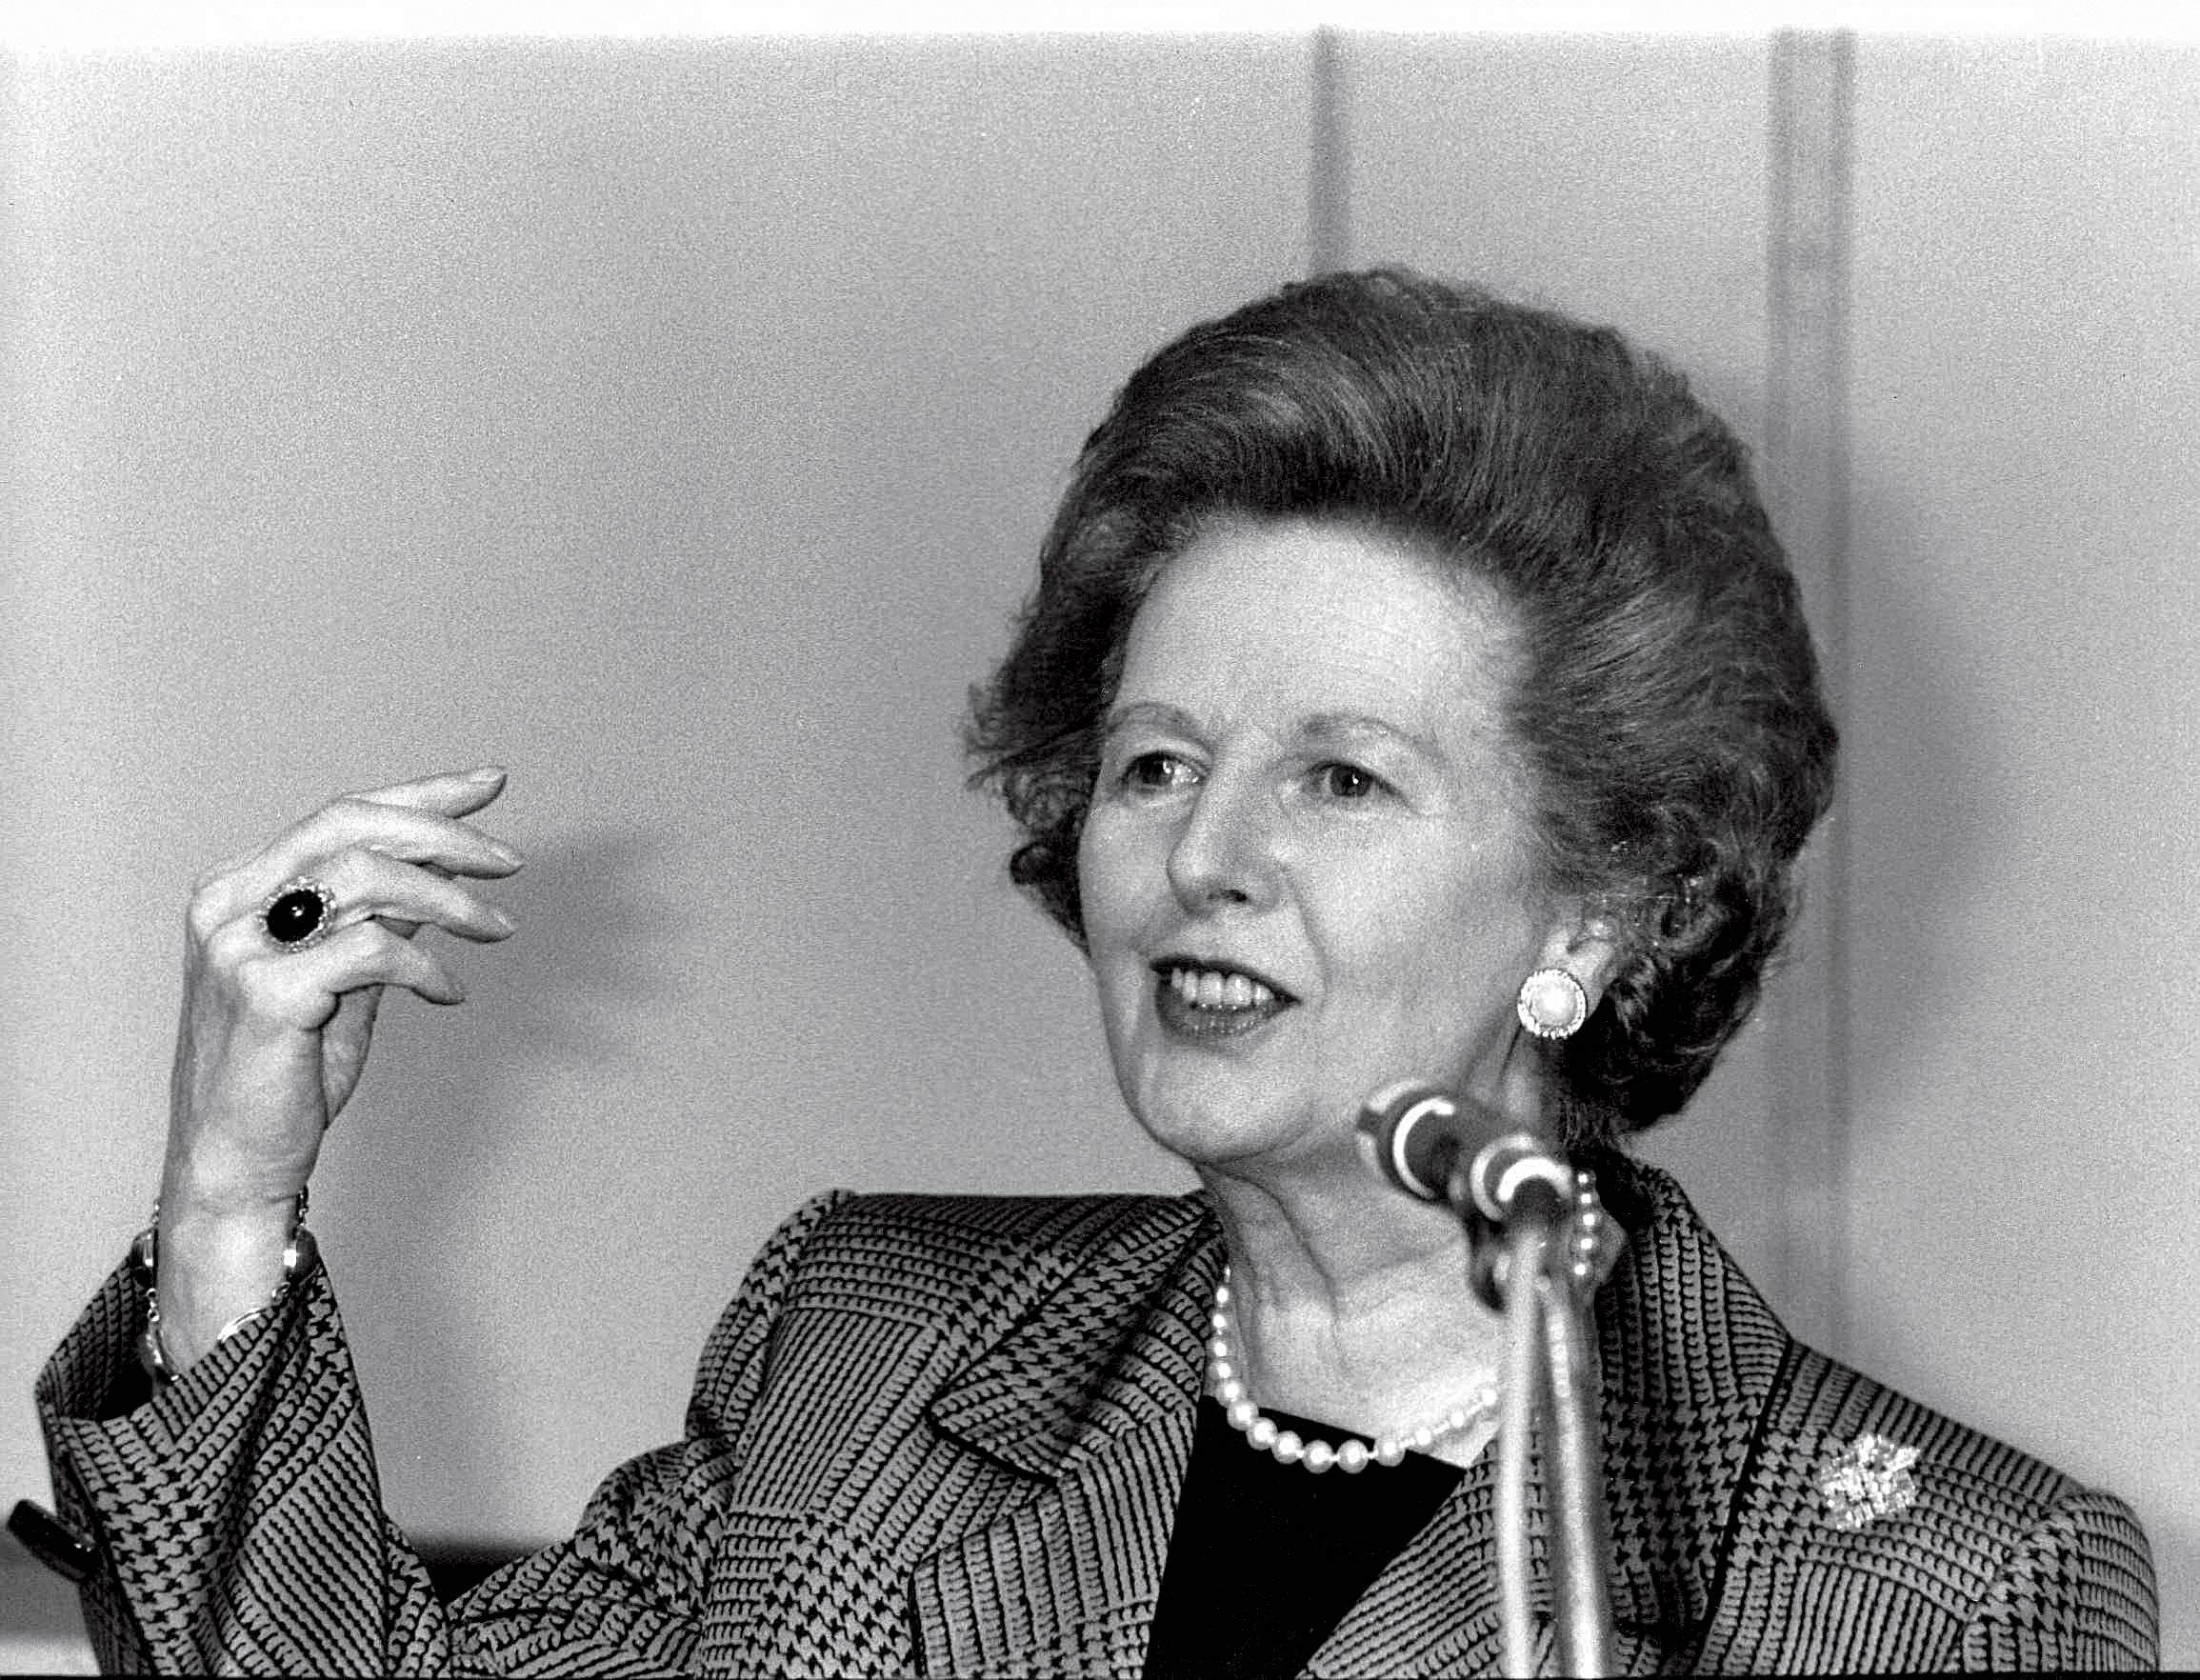 Margaret Thatcher
Iron Lady who changed the world
